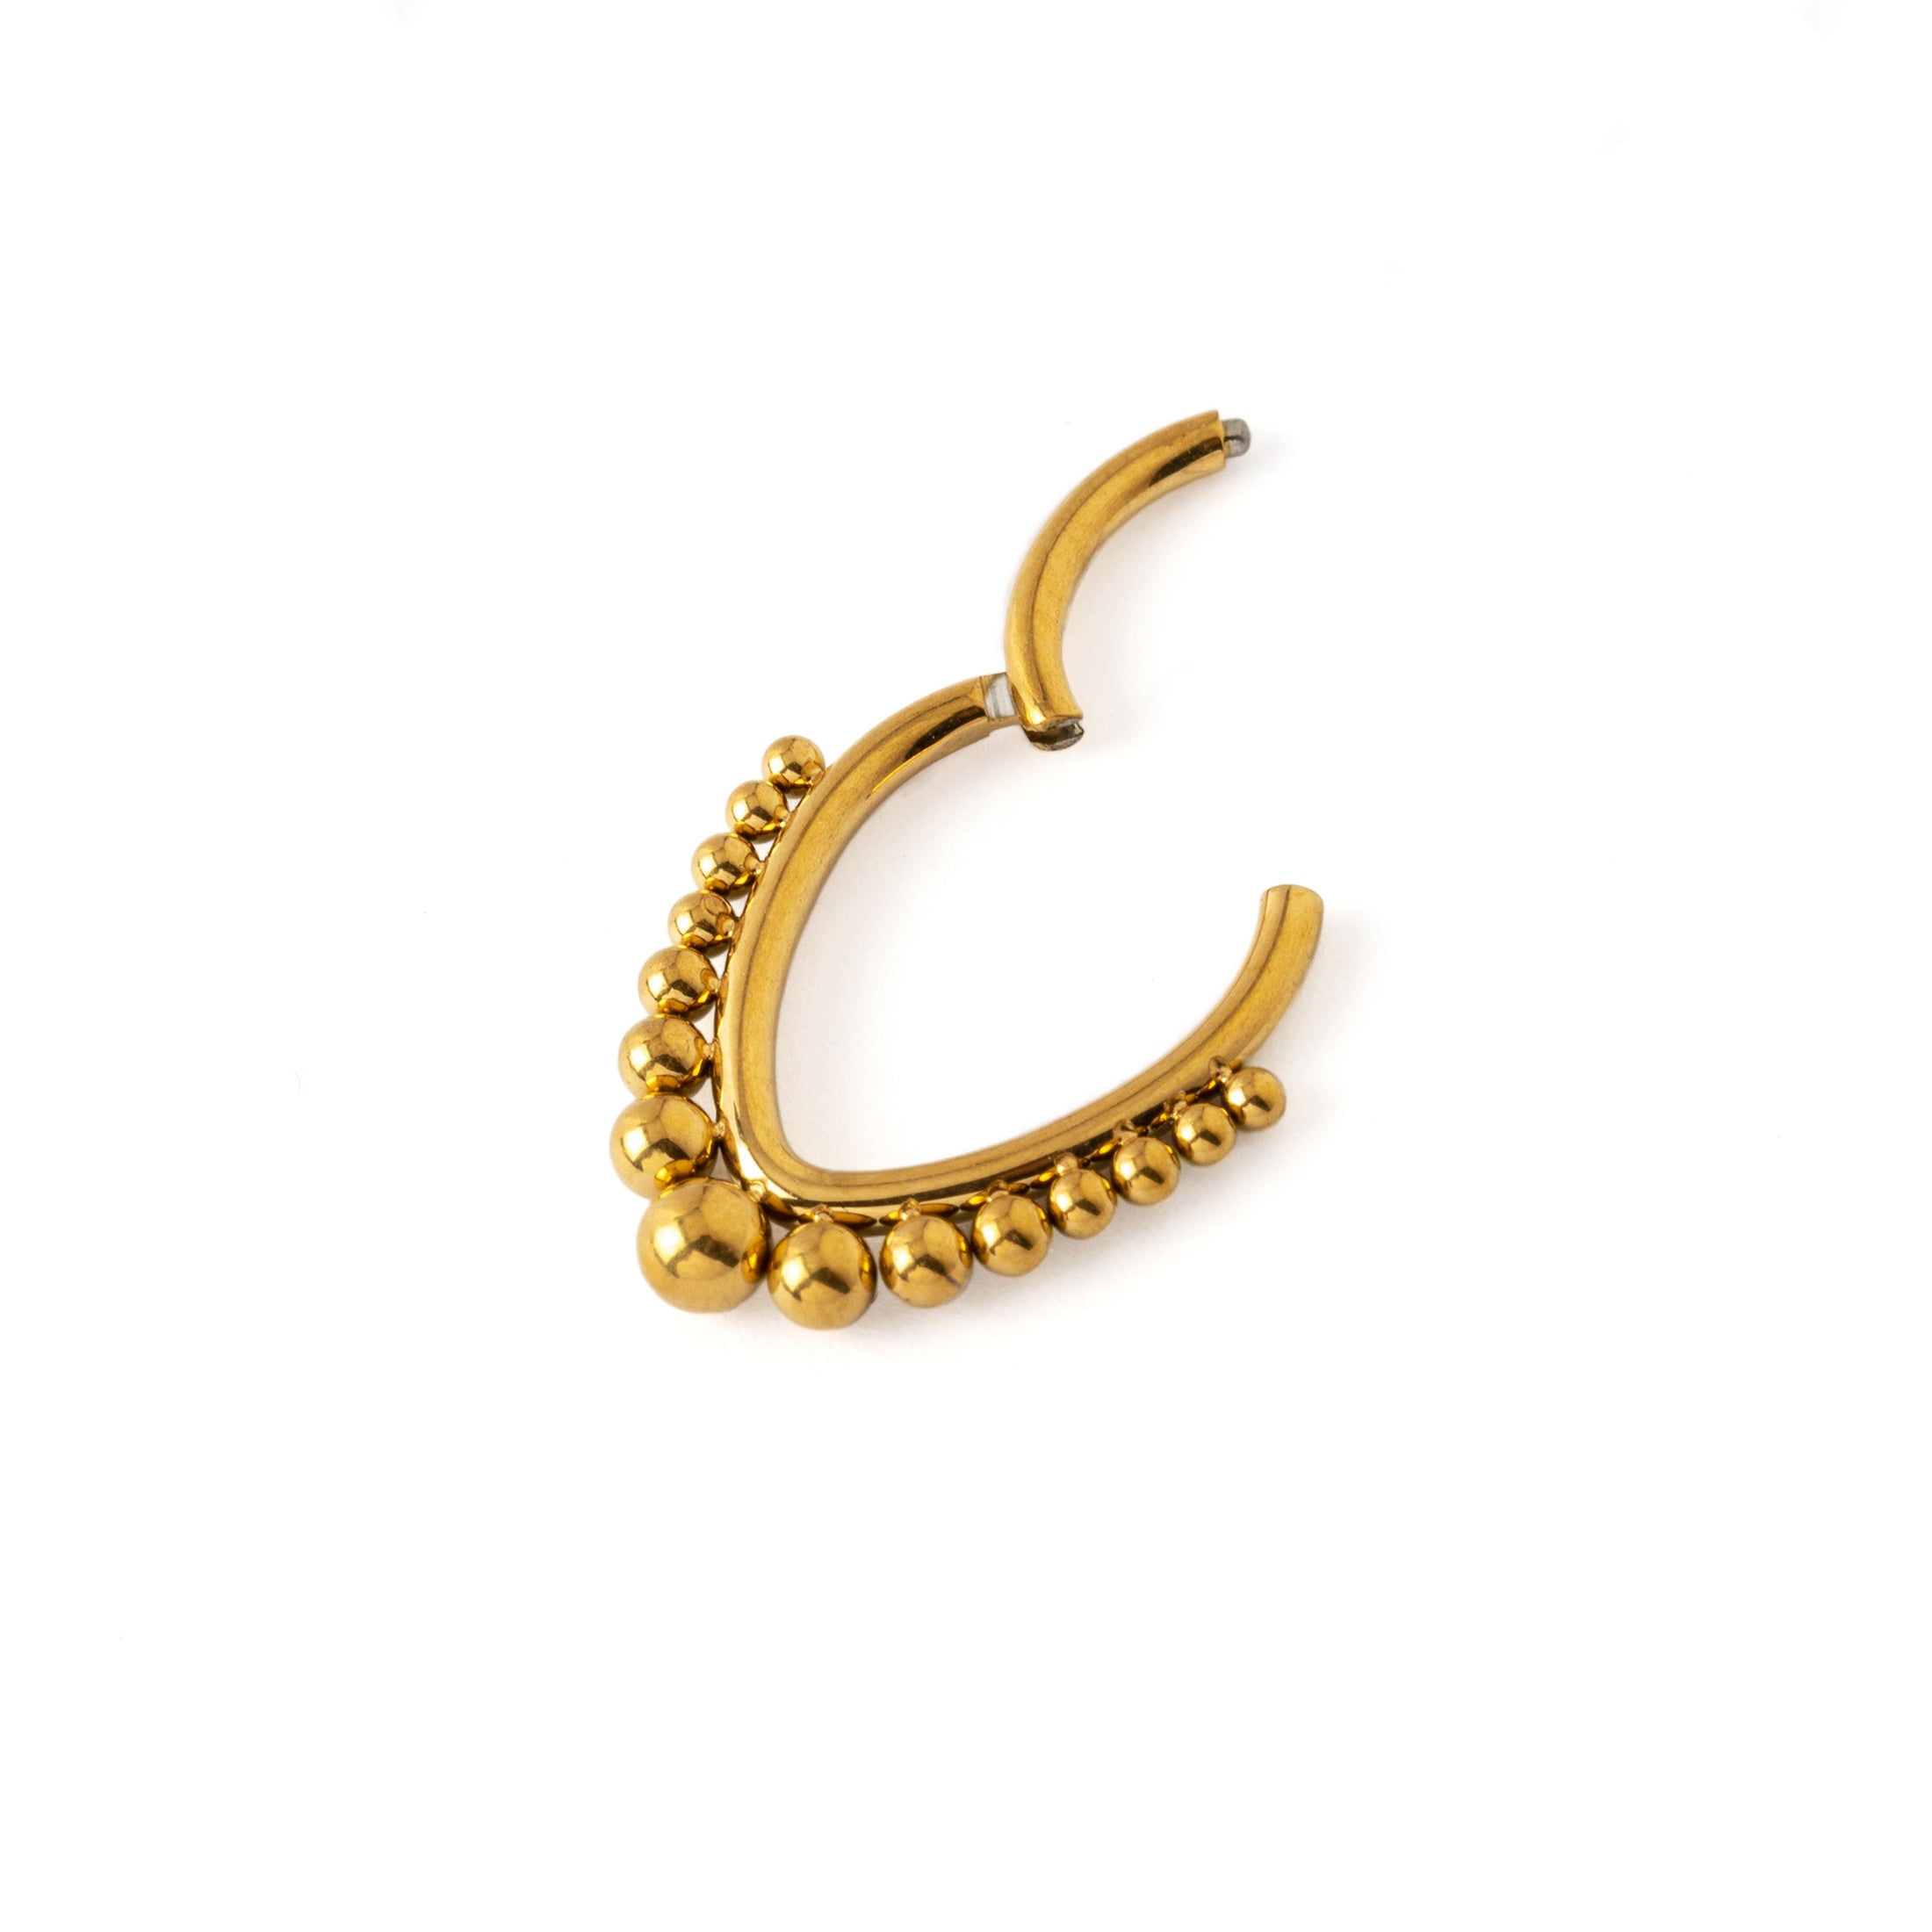 Althea Golden surgical steel Teardrop Septum Clicker ring hinged segment view